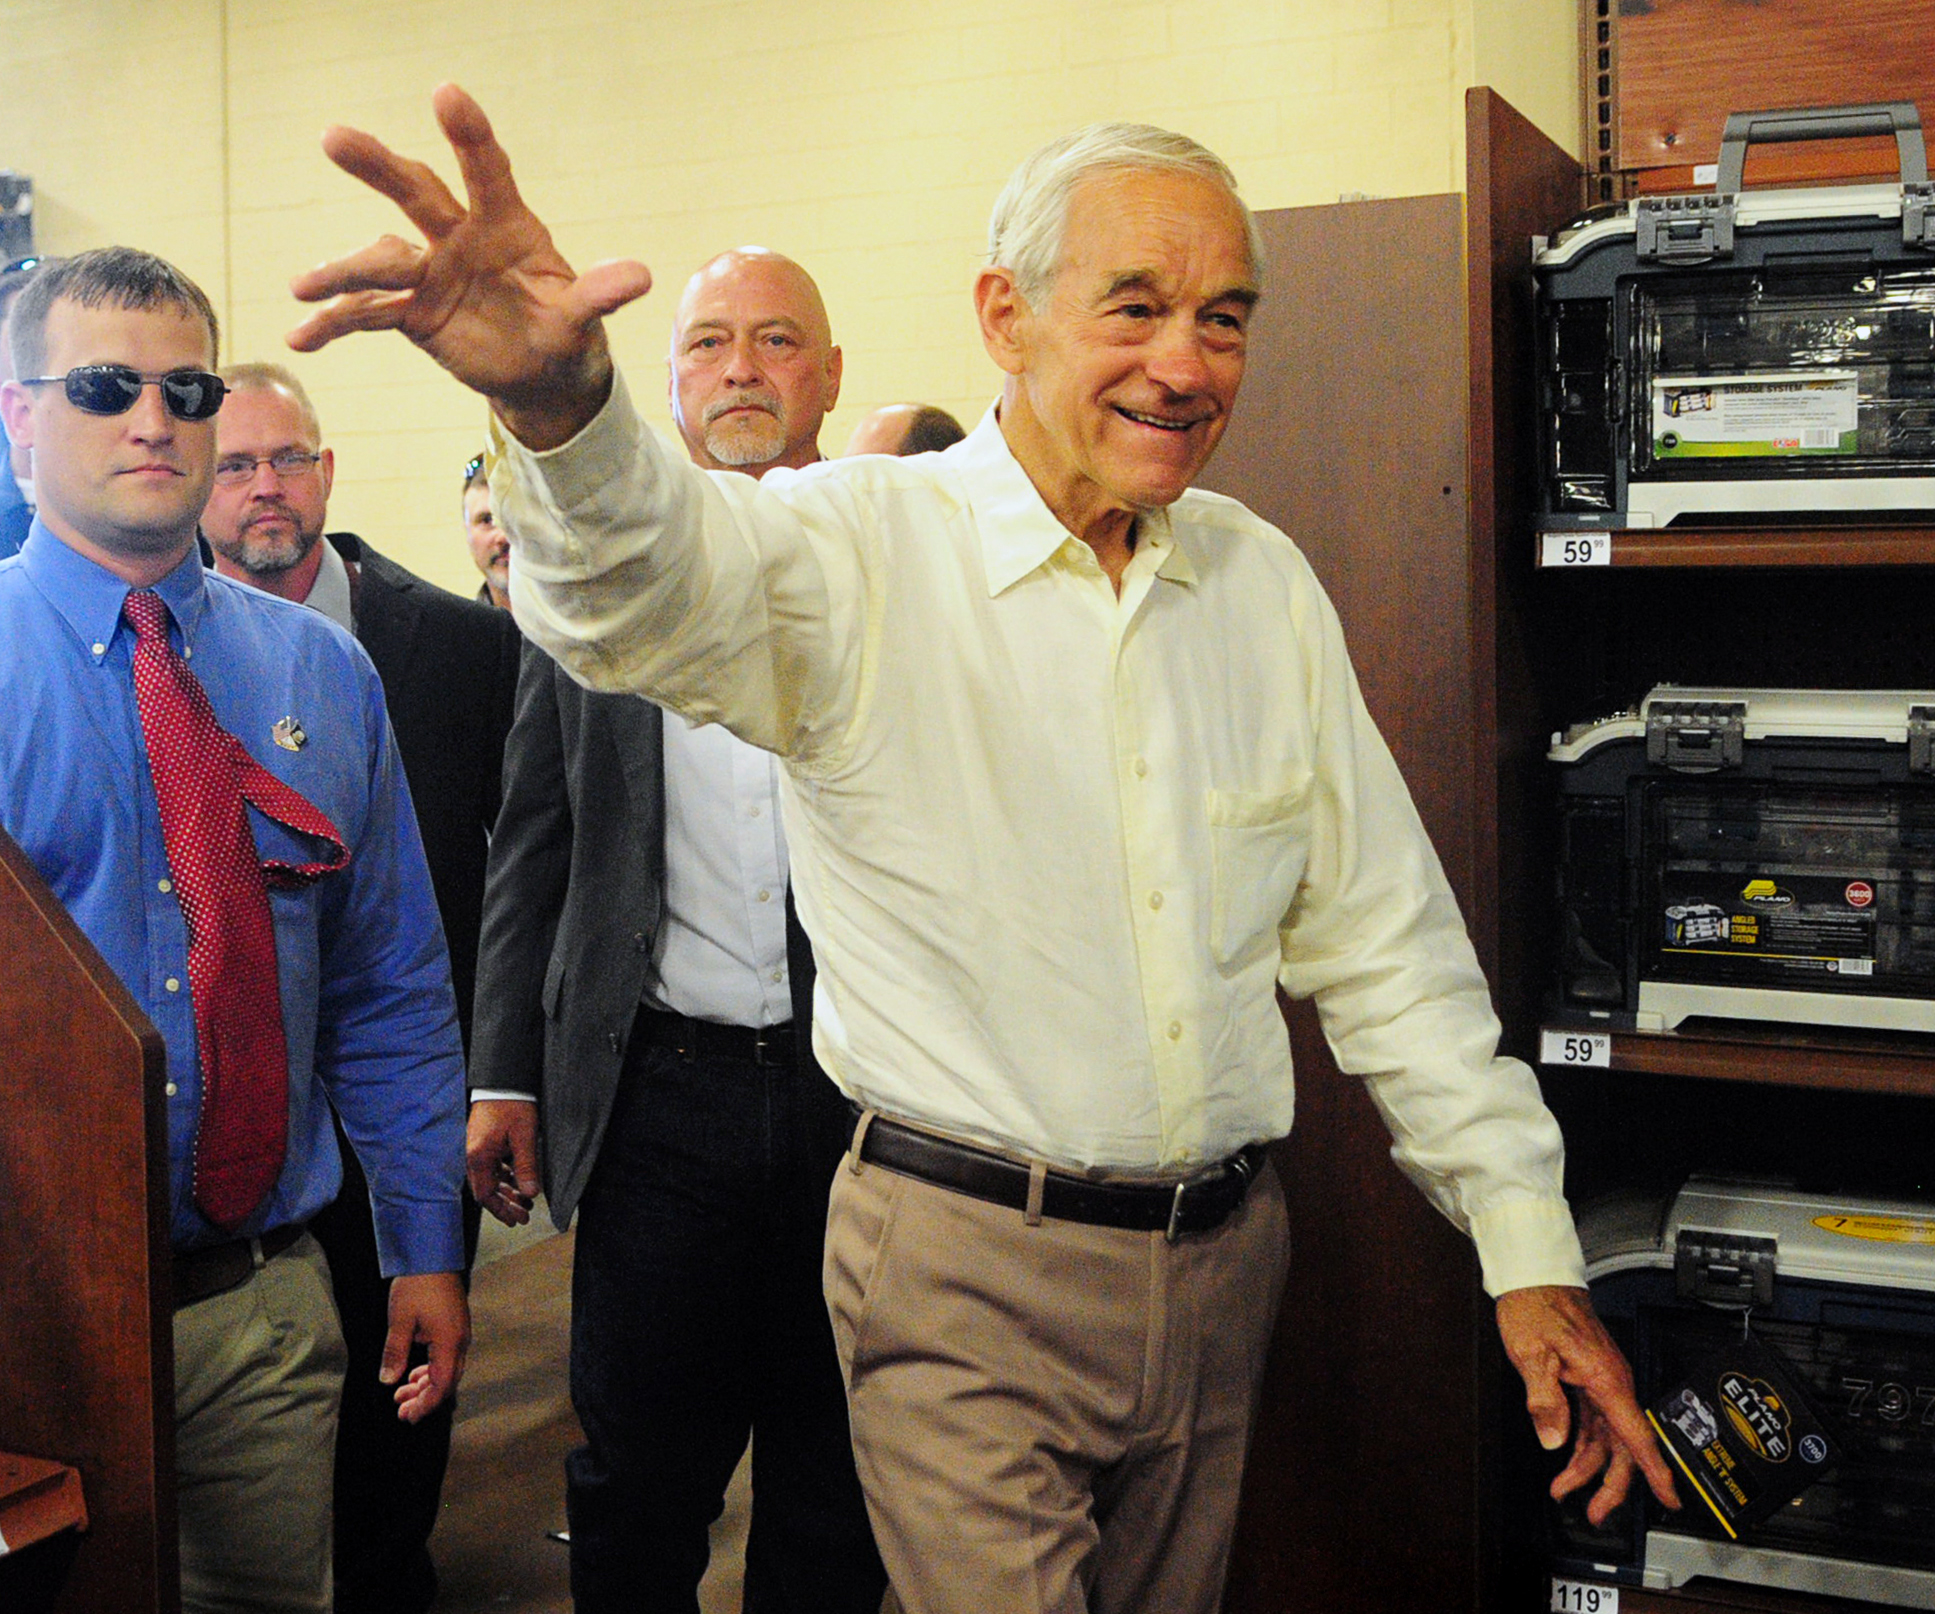 Former U.S. Rep. and presidential candidate Ron Paul waves to supporters before speaking at a campaign rally for U.S. Senate candidate Chris McDaniel, Saturday, June 14, 2014, at Gander Mountain in Hattiesburg, Miss. (Kelly Price—AP/The Hattiesburg American)